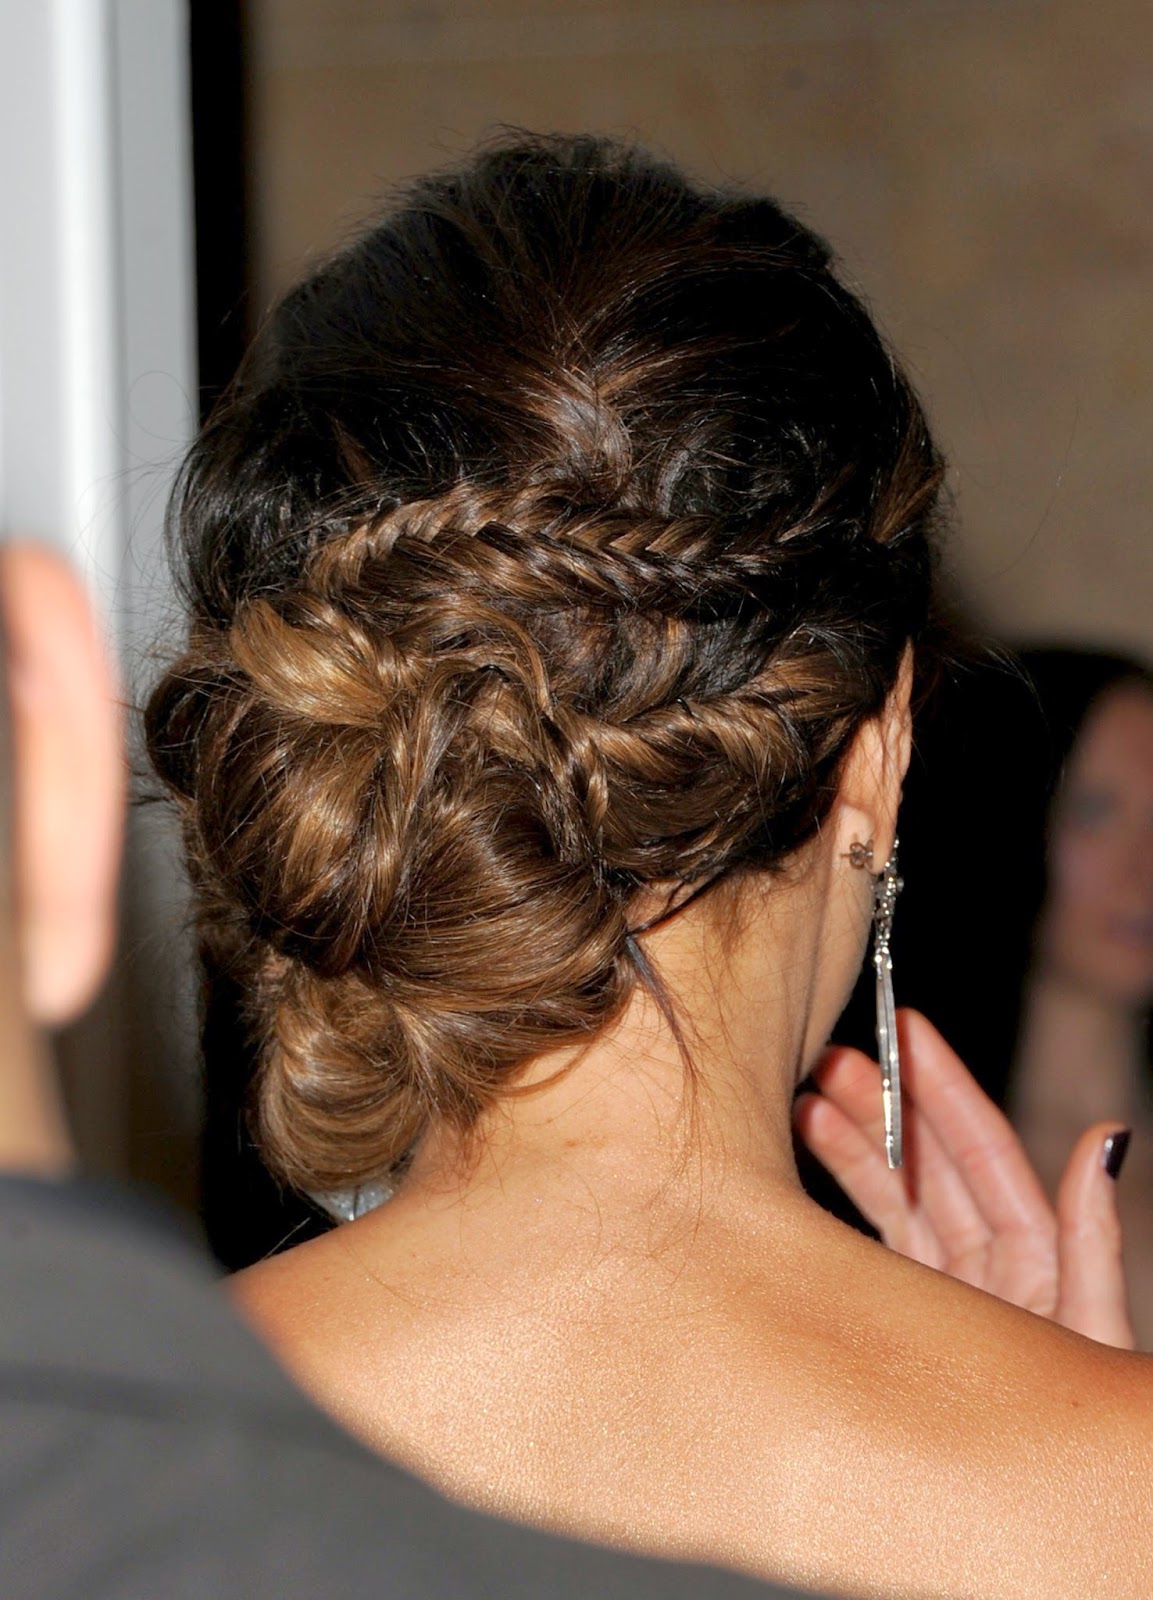 Updo Hairstyles for Prom and Homecoming